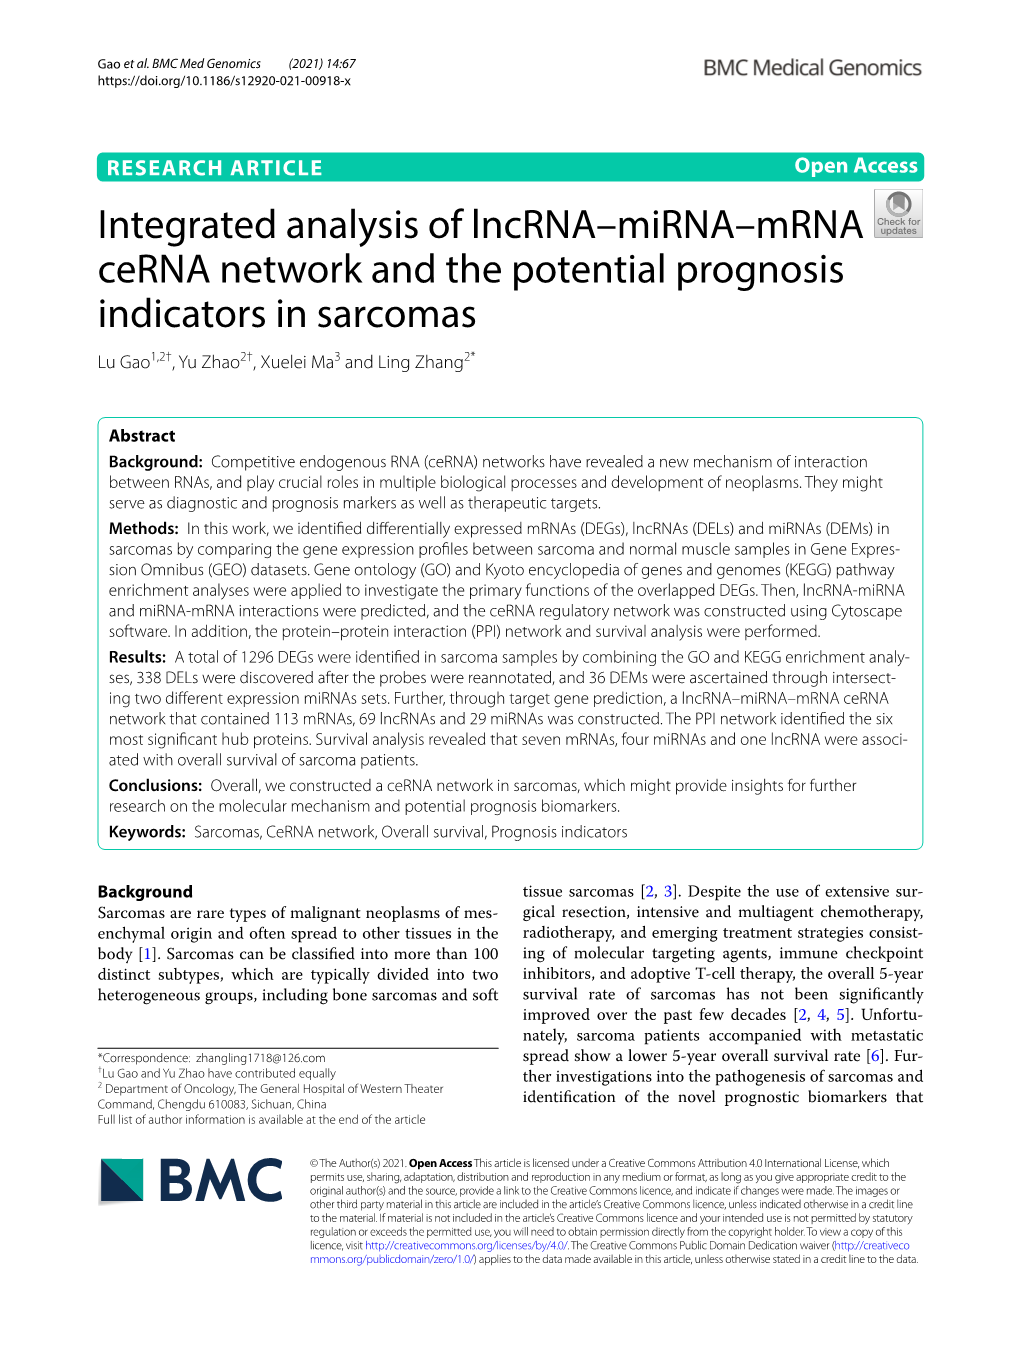 Integrated Analysis of Lncrna–Mirna–Mrna Cerna Network and the Potential Prognosis Indicators in Sarcomas Lu Gao1,2†, Yu Zhao2†, Xuelei Ma3 and Ling Zhang2*